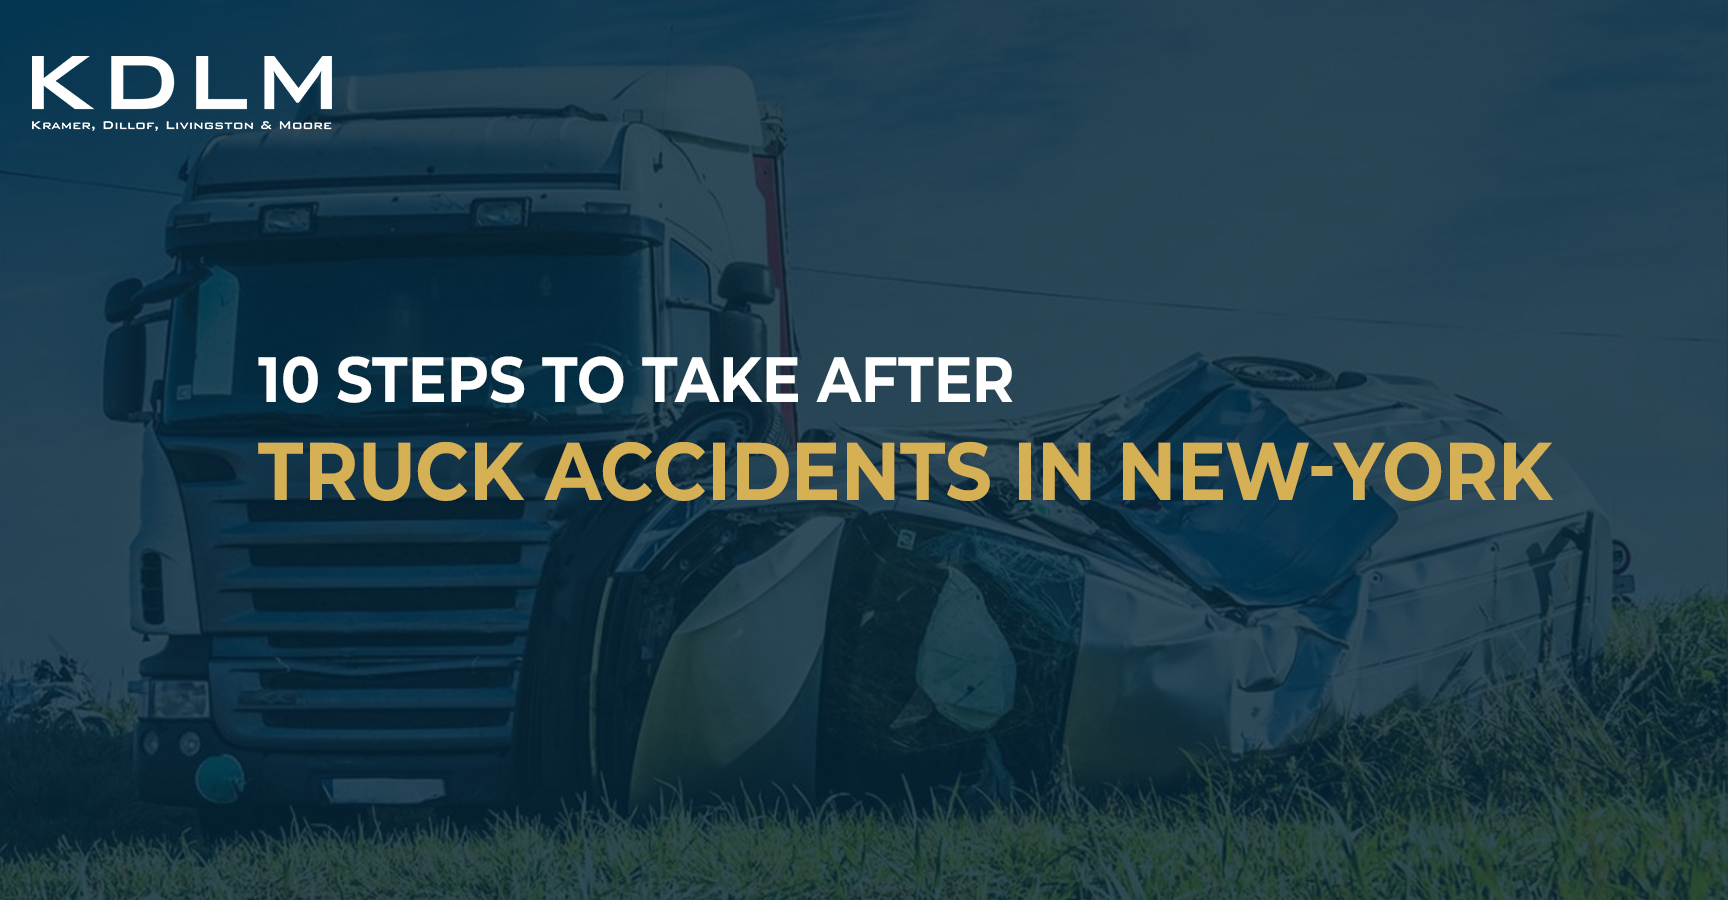 10 steps to take after truck accidents in New York.